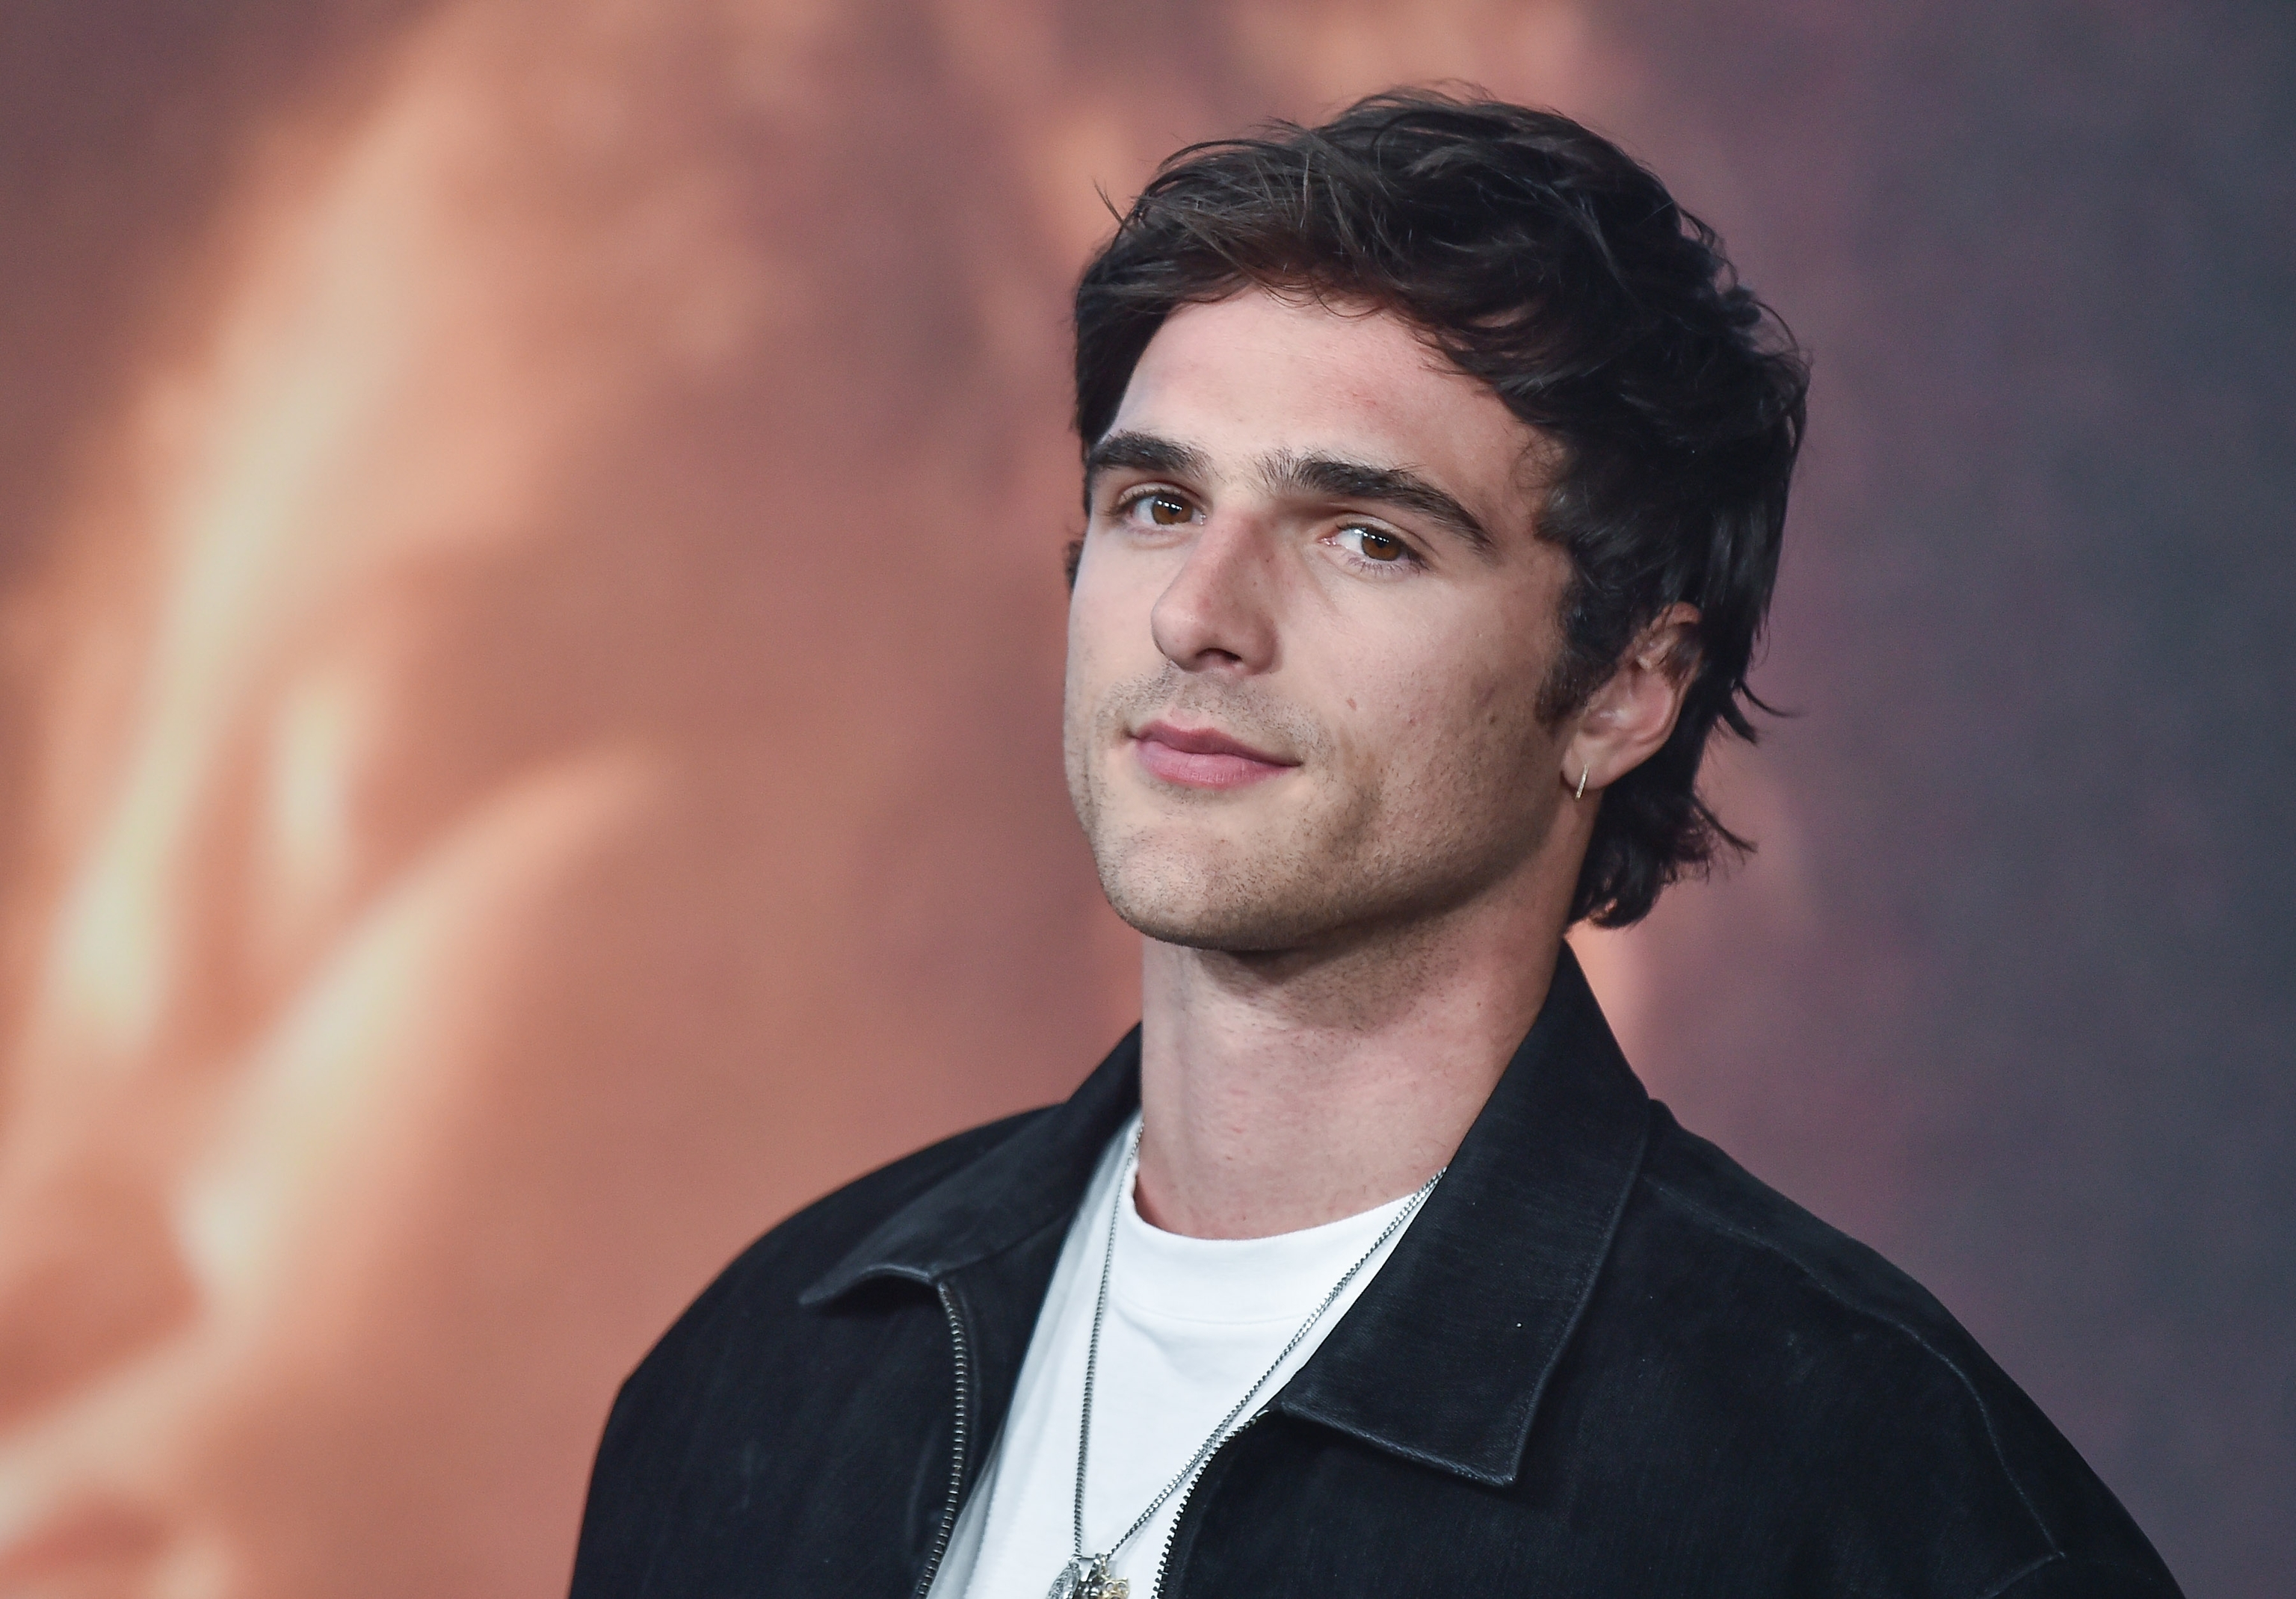 Jacob Elordi at the 'Euphoria' FYC Party in Los Angeles, CA, in April 2022.